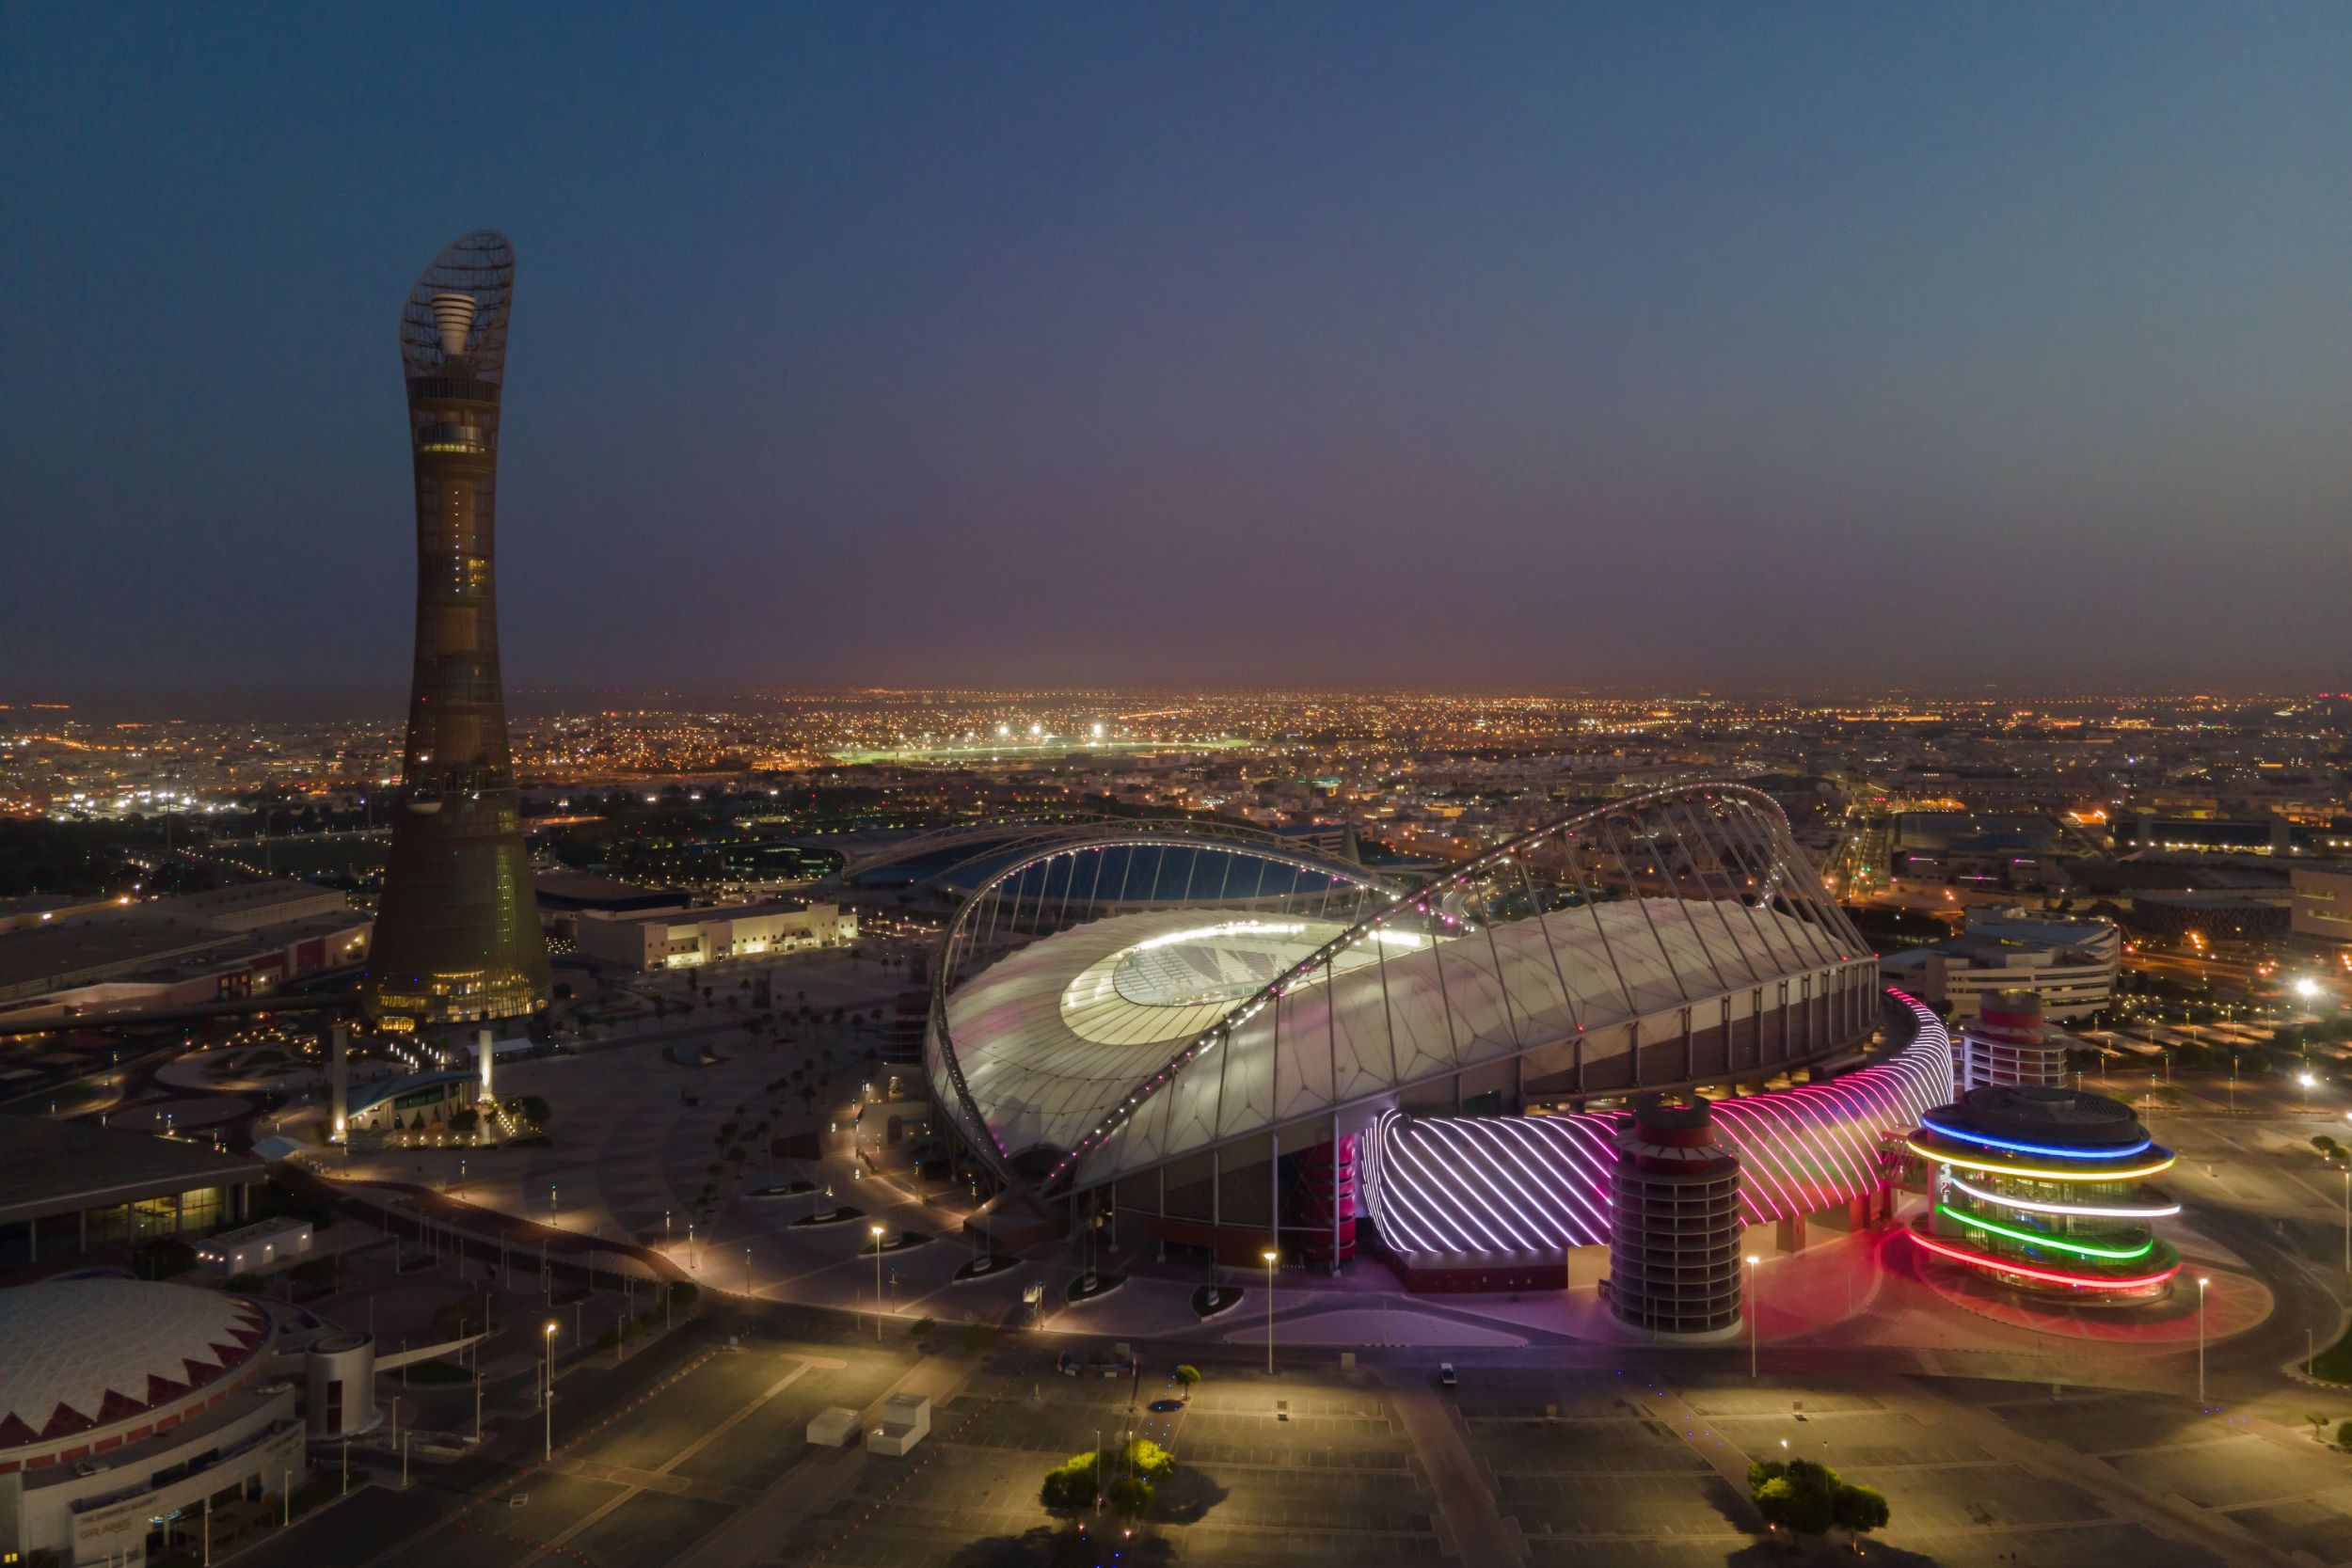 Eight venues in Qatar will host the World Cup